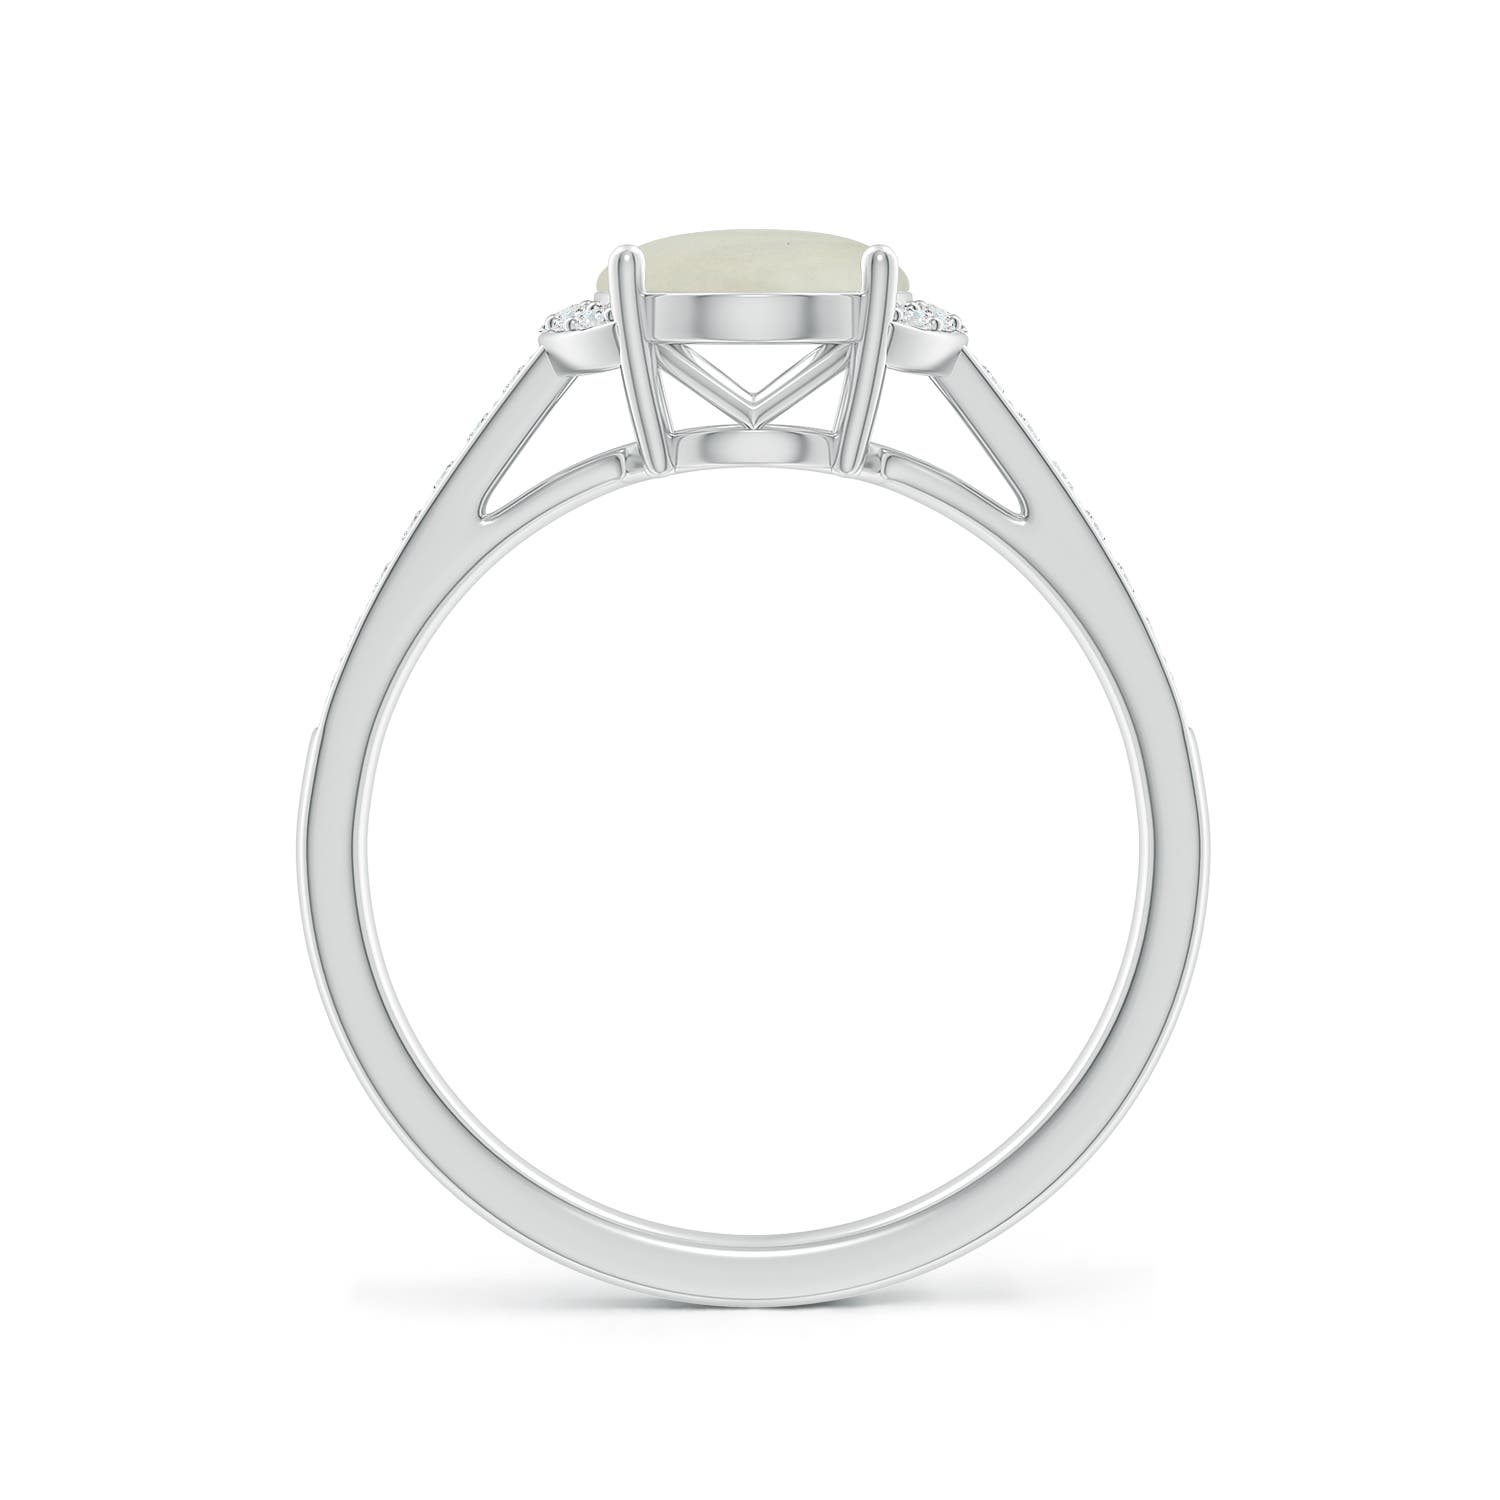 AA - Moonstone / 1.88 CT / 14 KT White Gold